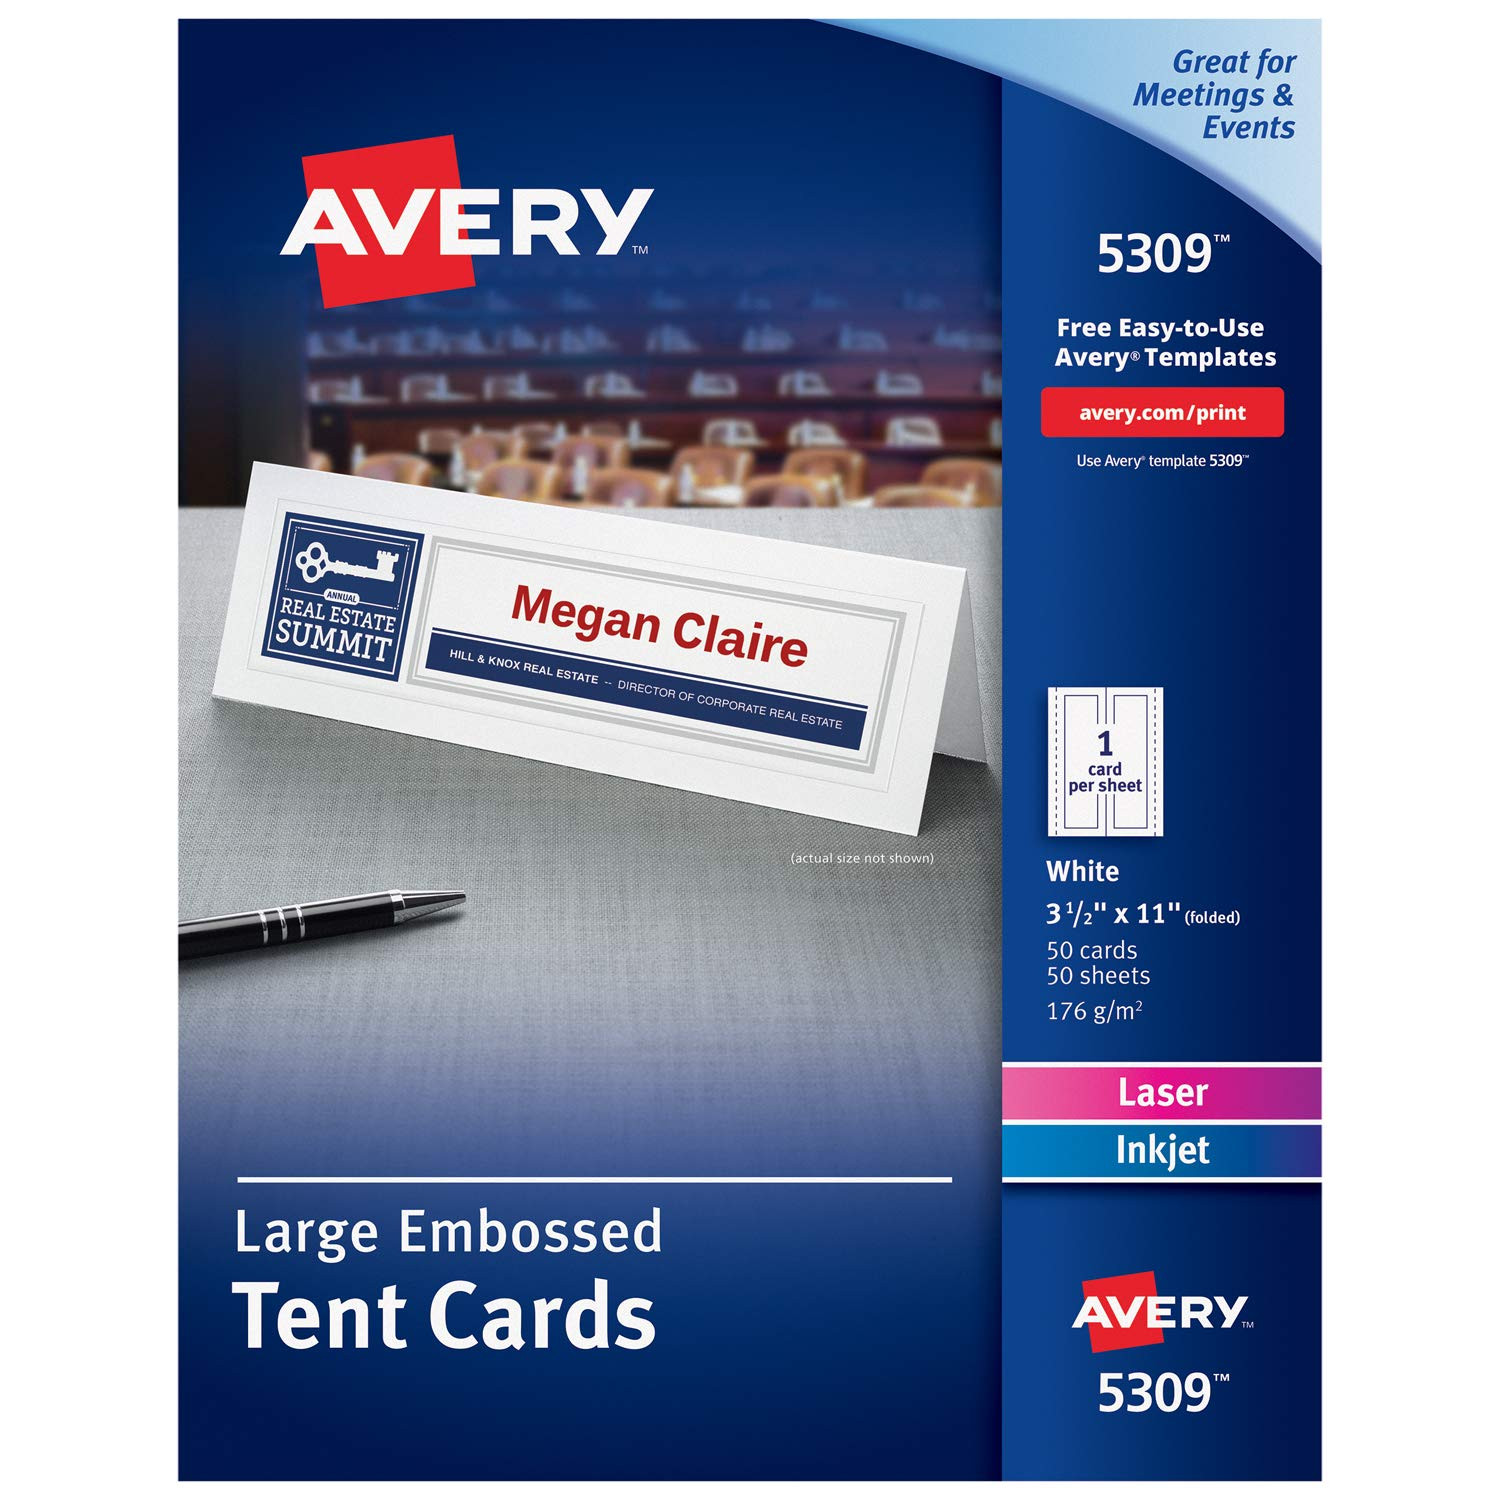 Avery Printable Tent Cards Laser &amp; Inkjet Printers 50 Cards 3 5 X 11 5309 White Of Premium Business Card Templates